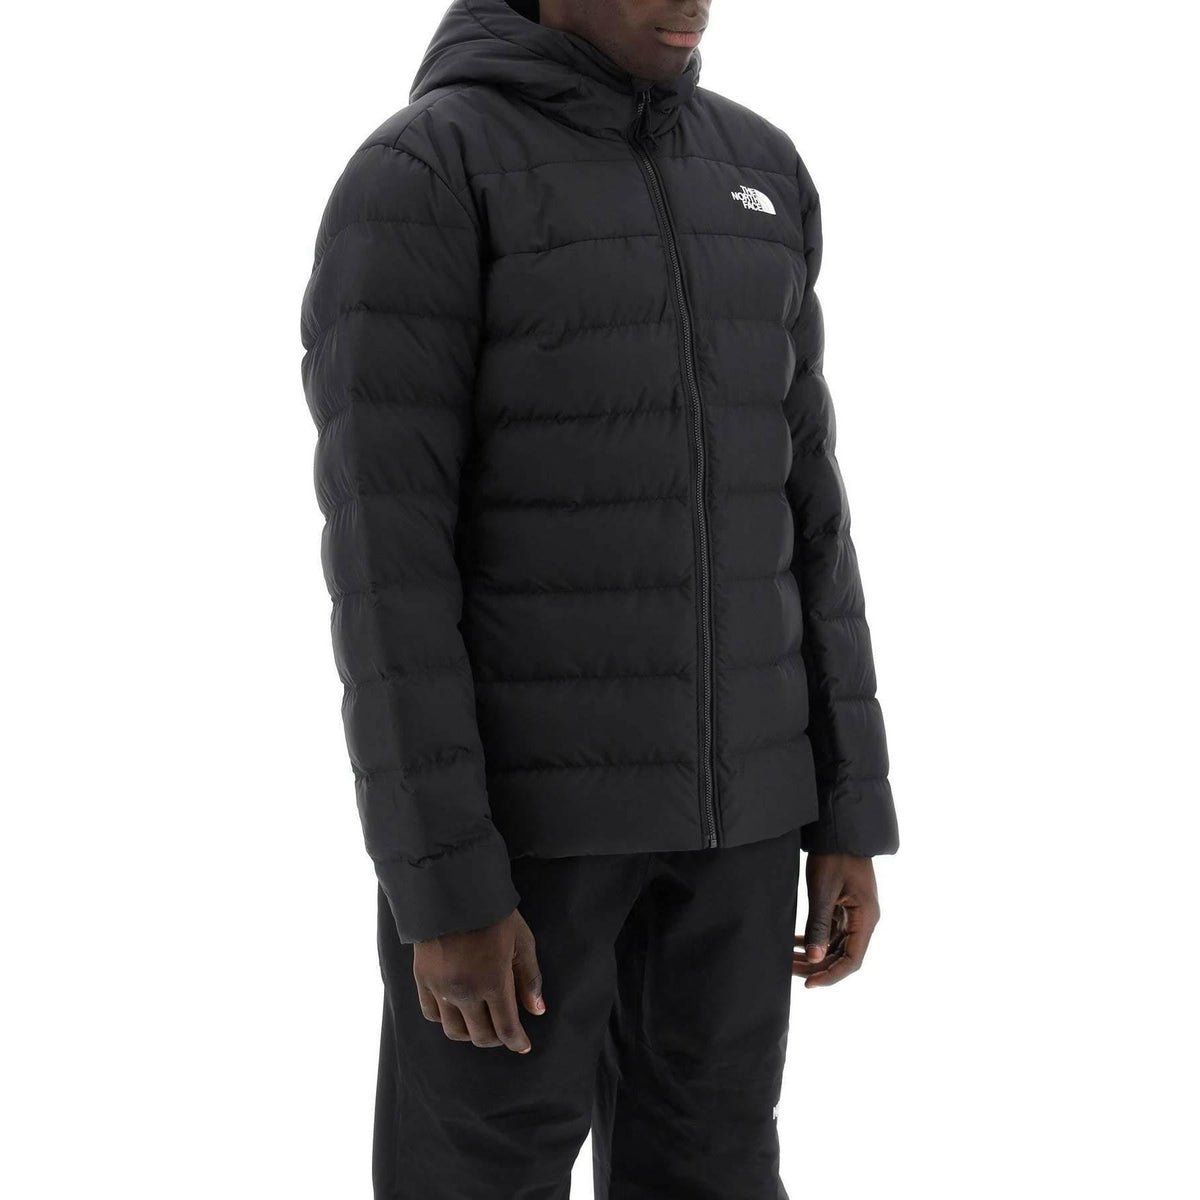 THE NORTH FACE - The North Face Black Aconcagua Iii Lightweight Puffer Jacket with recycled down - JOHN JULIA